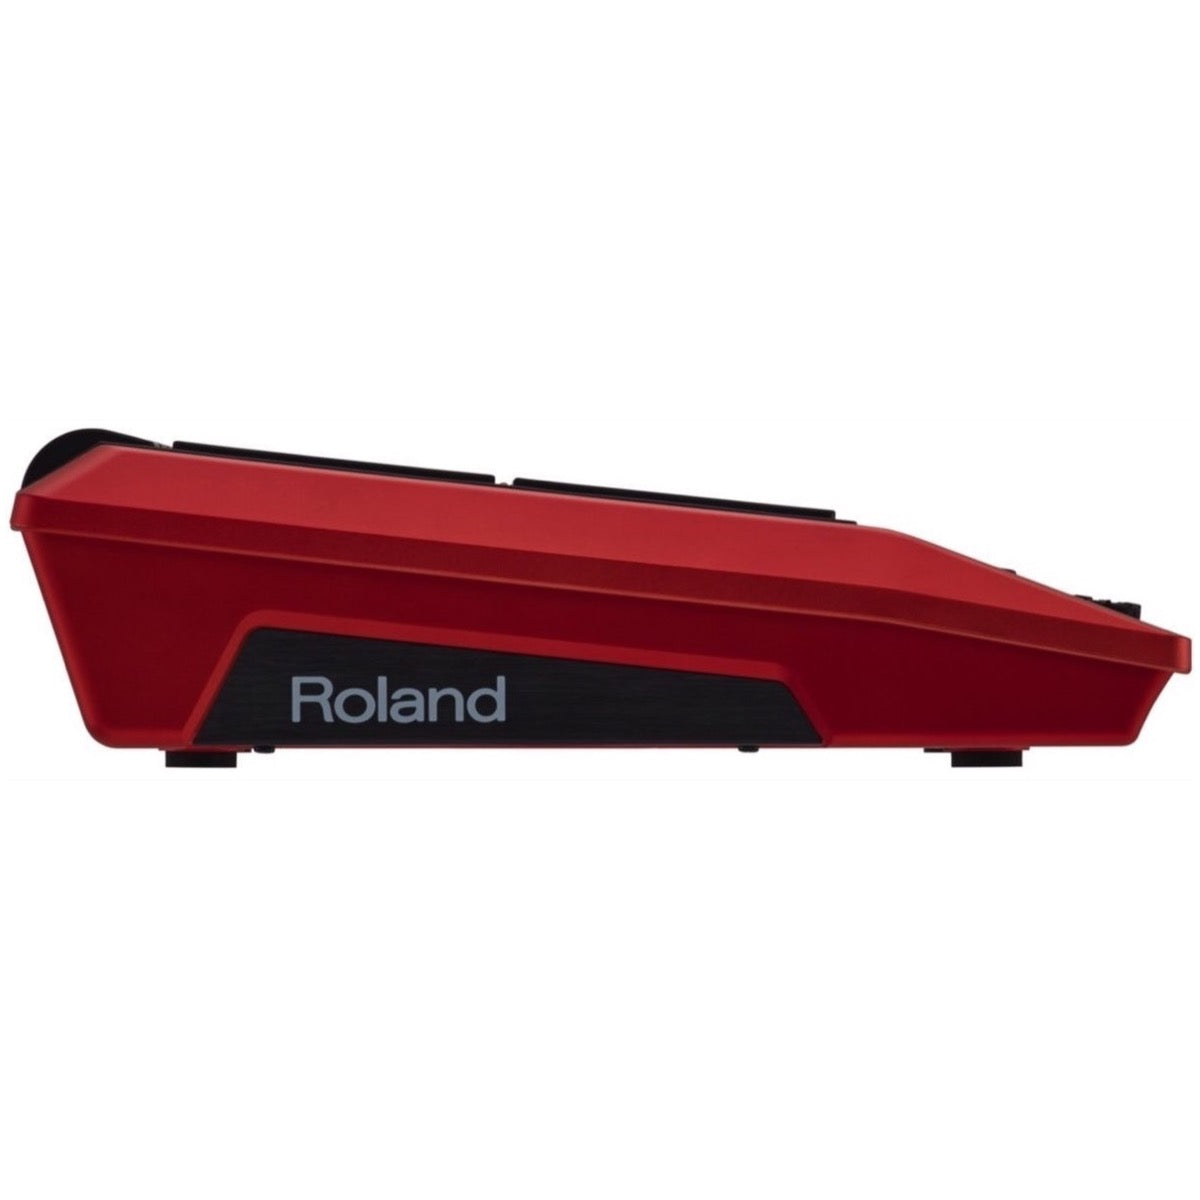 Roland SPD-SX Special Edition Red Sampling Drum Pad